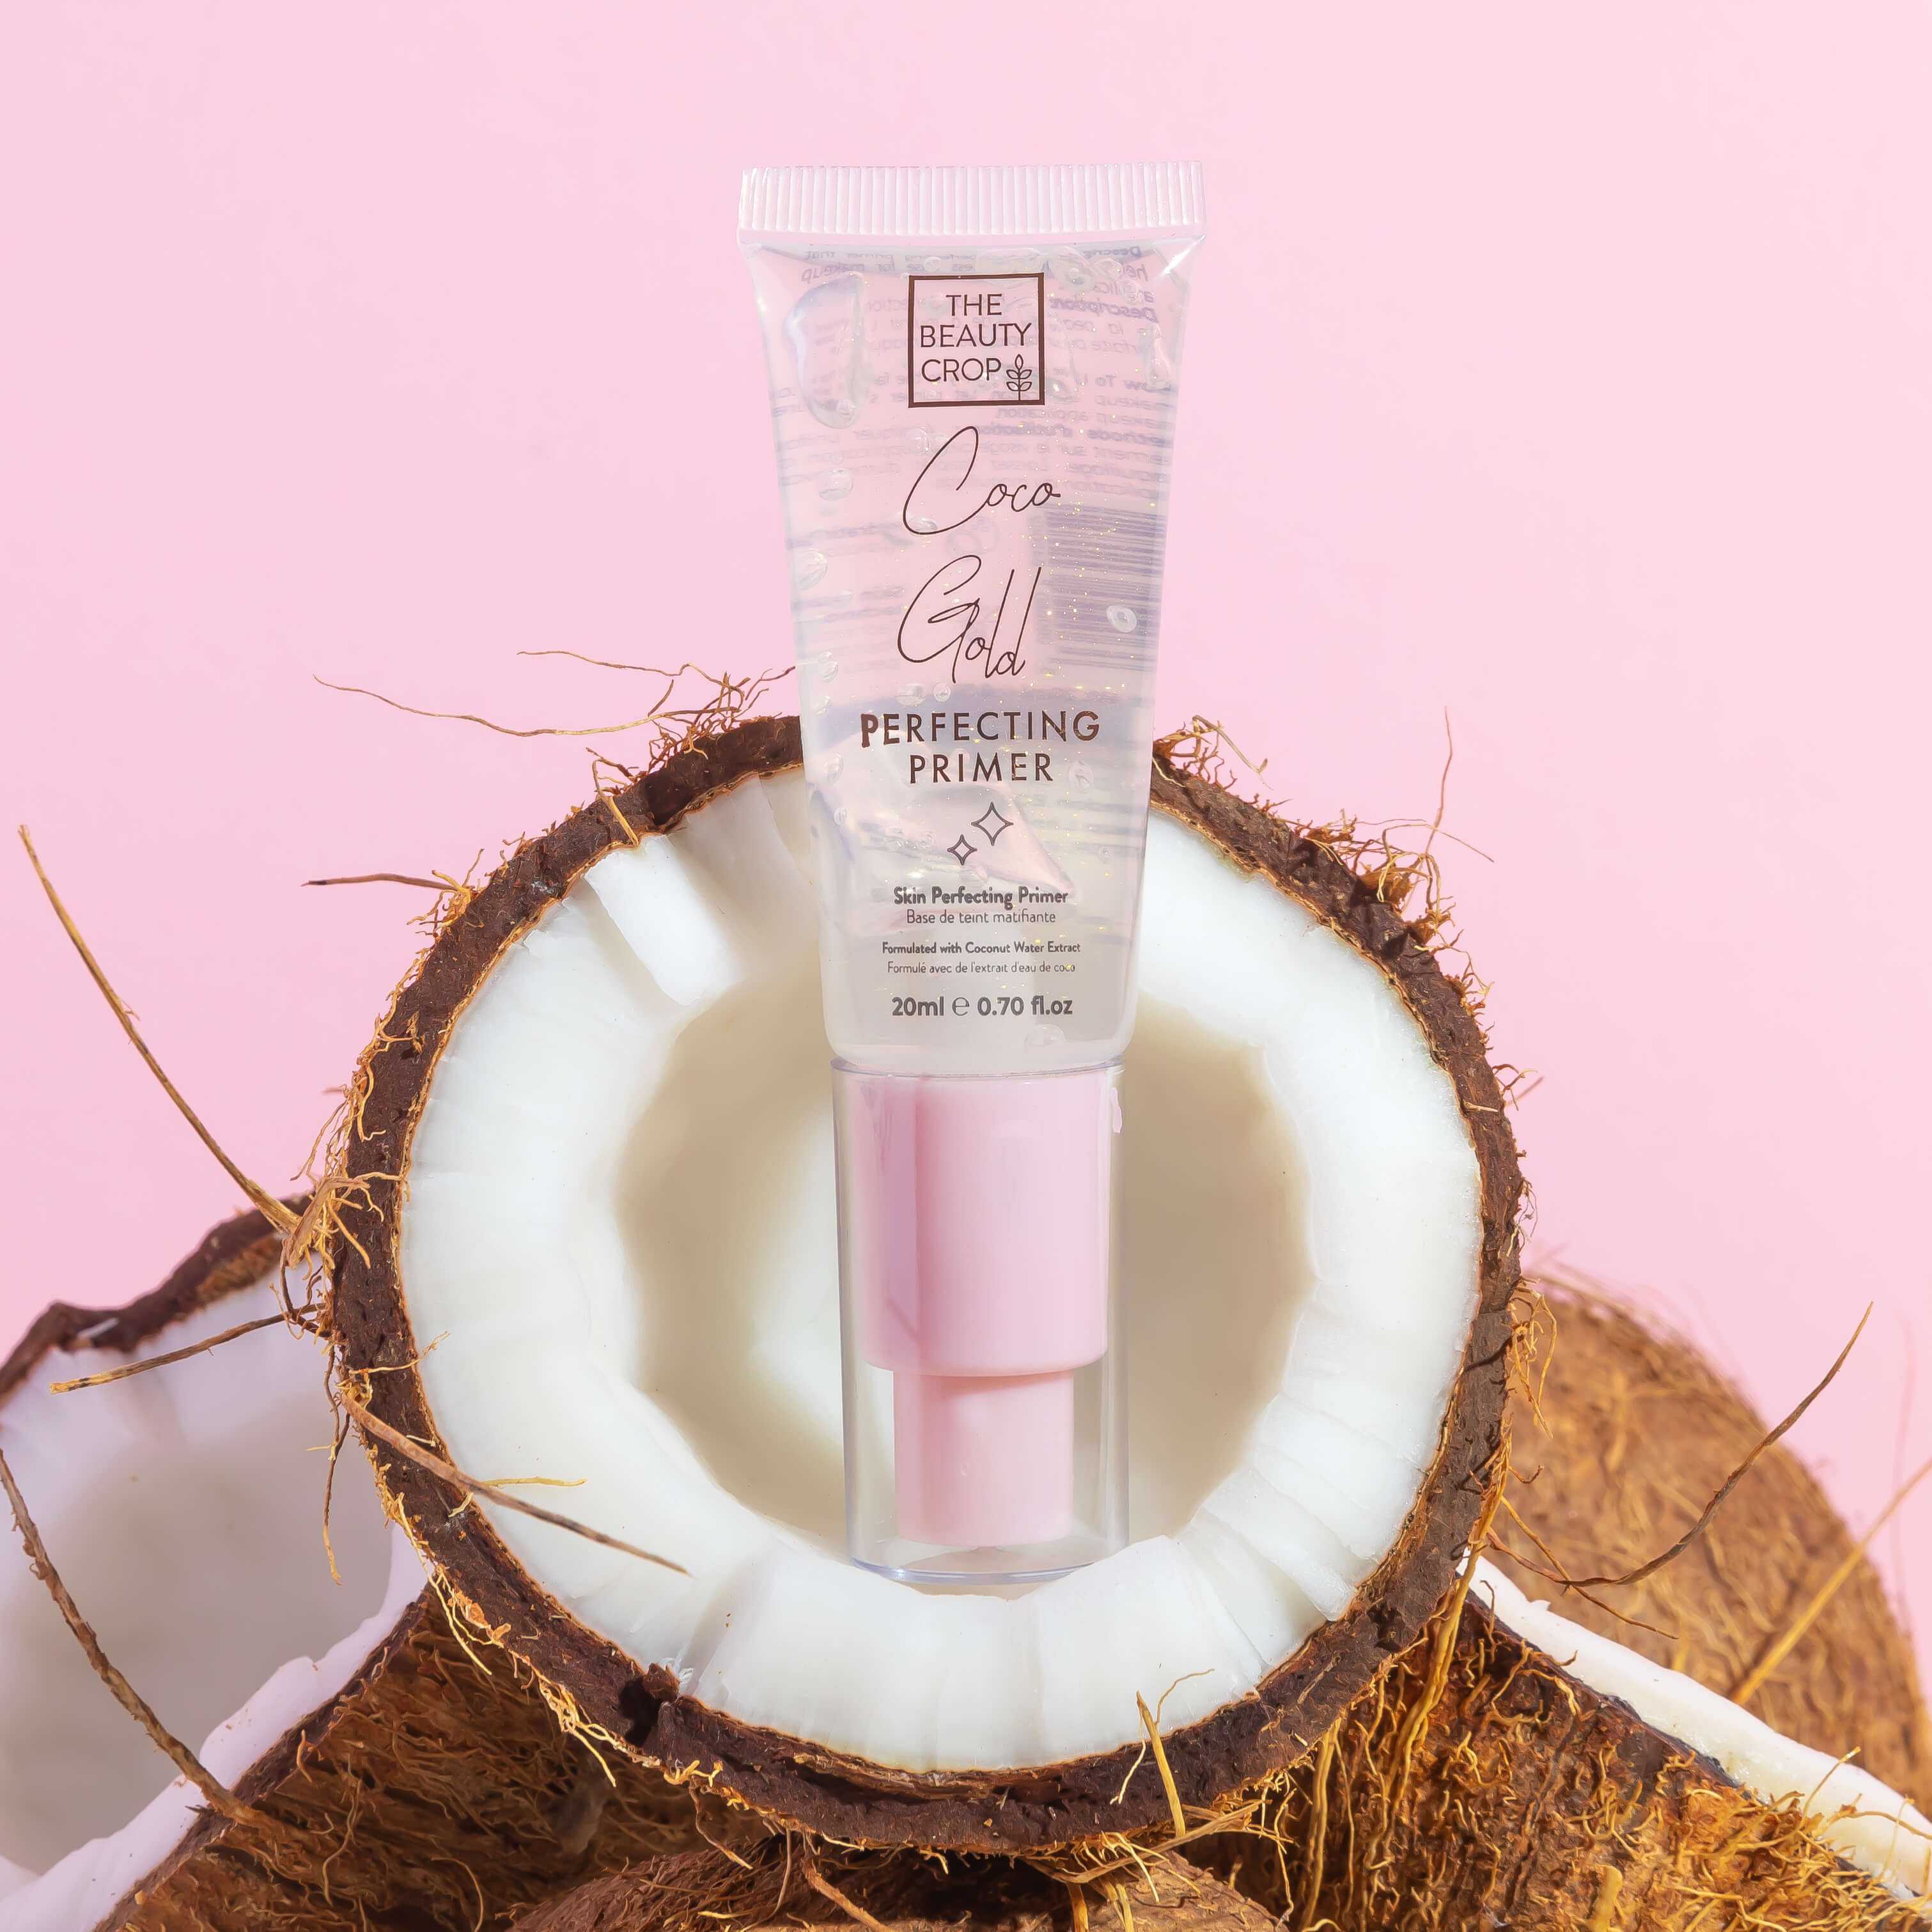 Coco Gold Perfecting Primer - The Beauty Crop UK